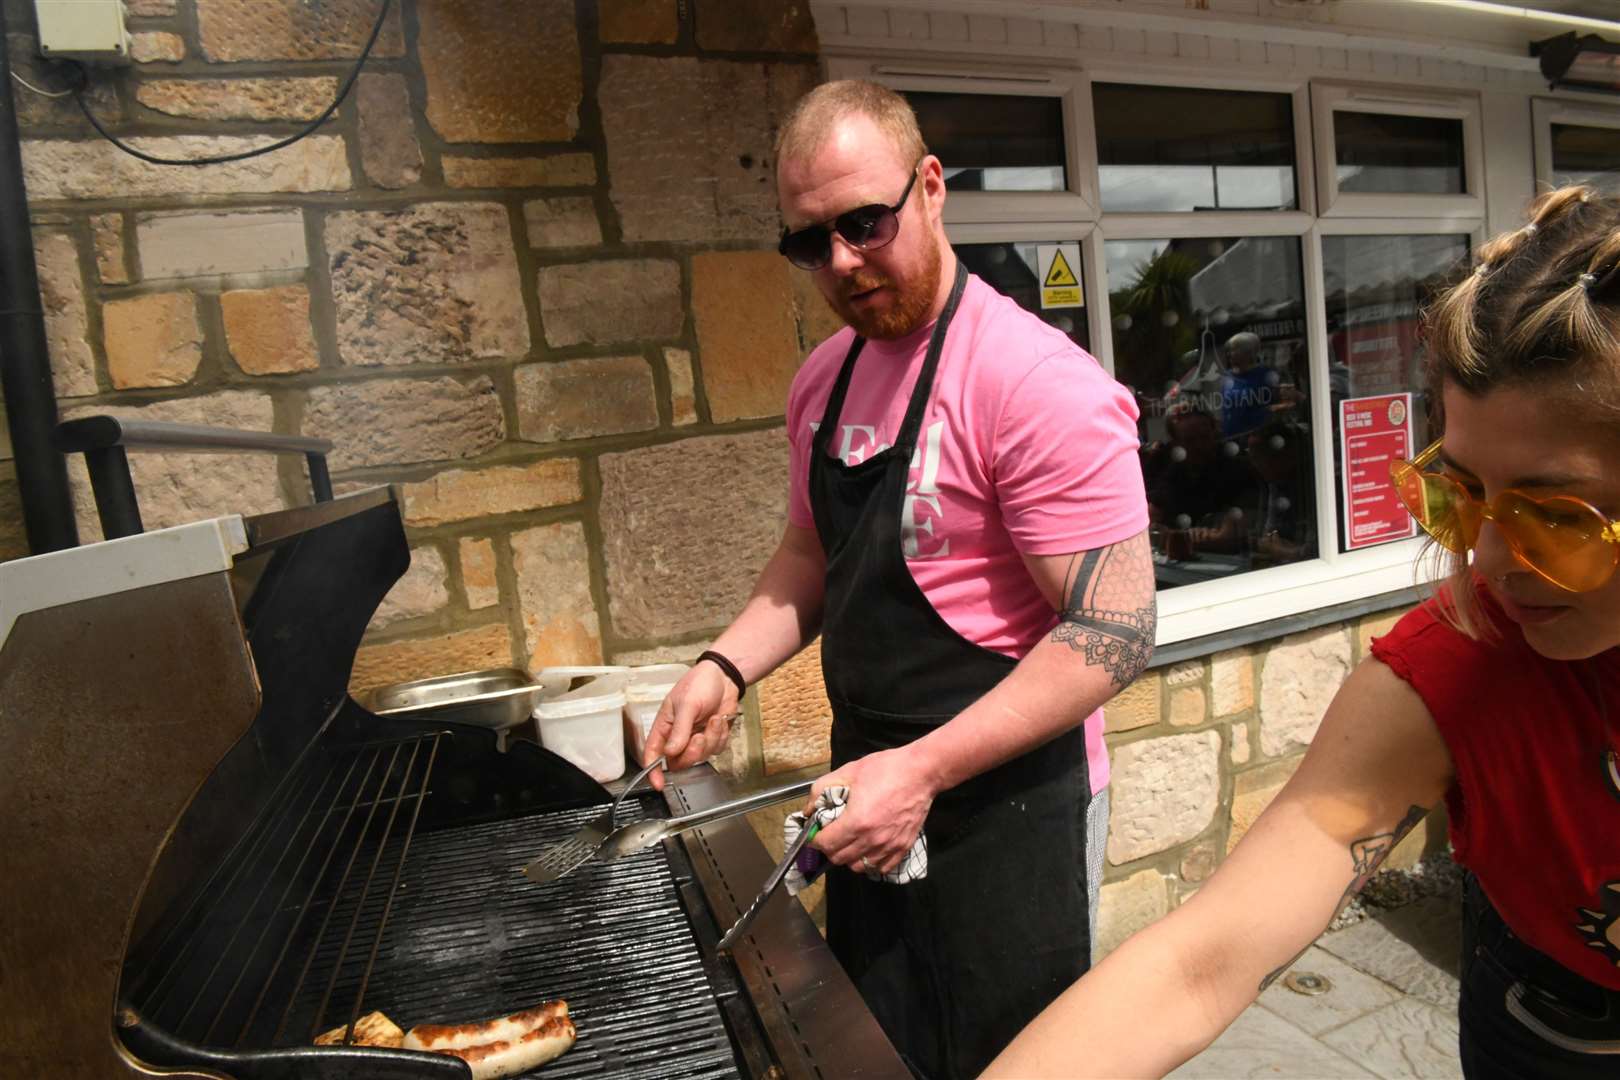 Murray was taking care of the barbeque. Picture: James Mackenzie.